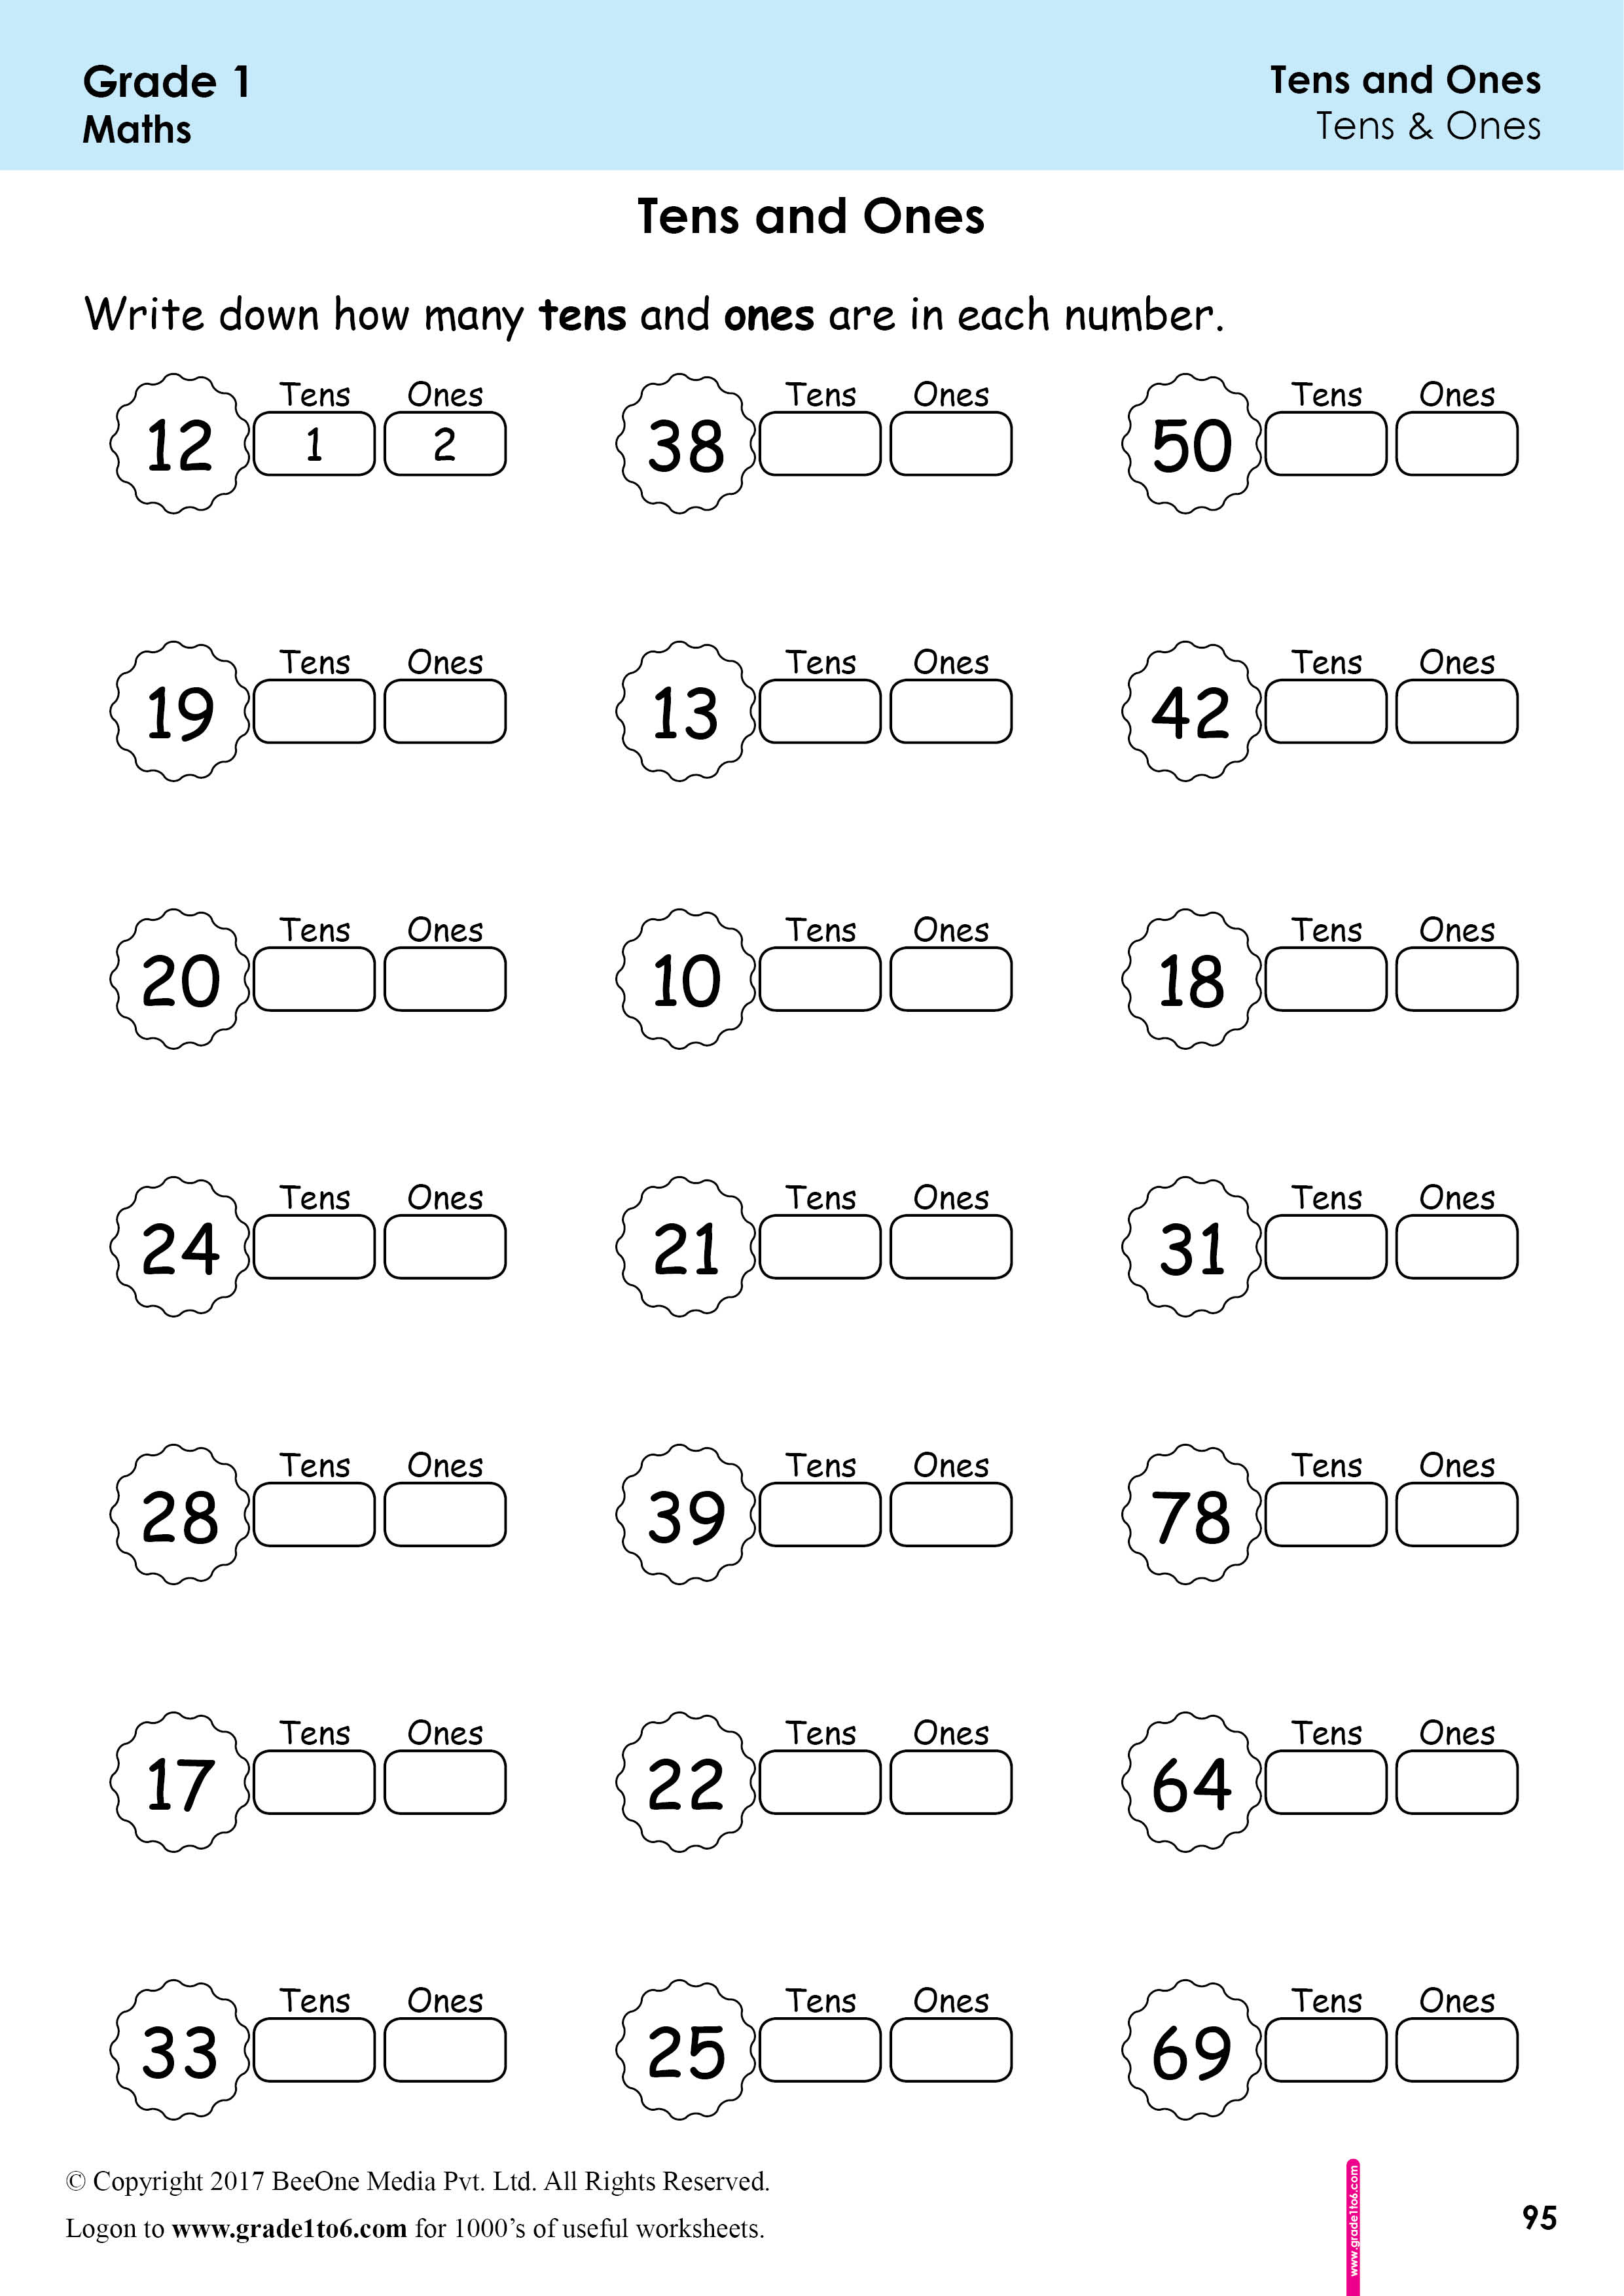 first-grade-class-1-tens-ones-worksheets-grade1to6